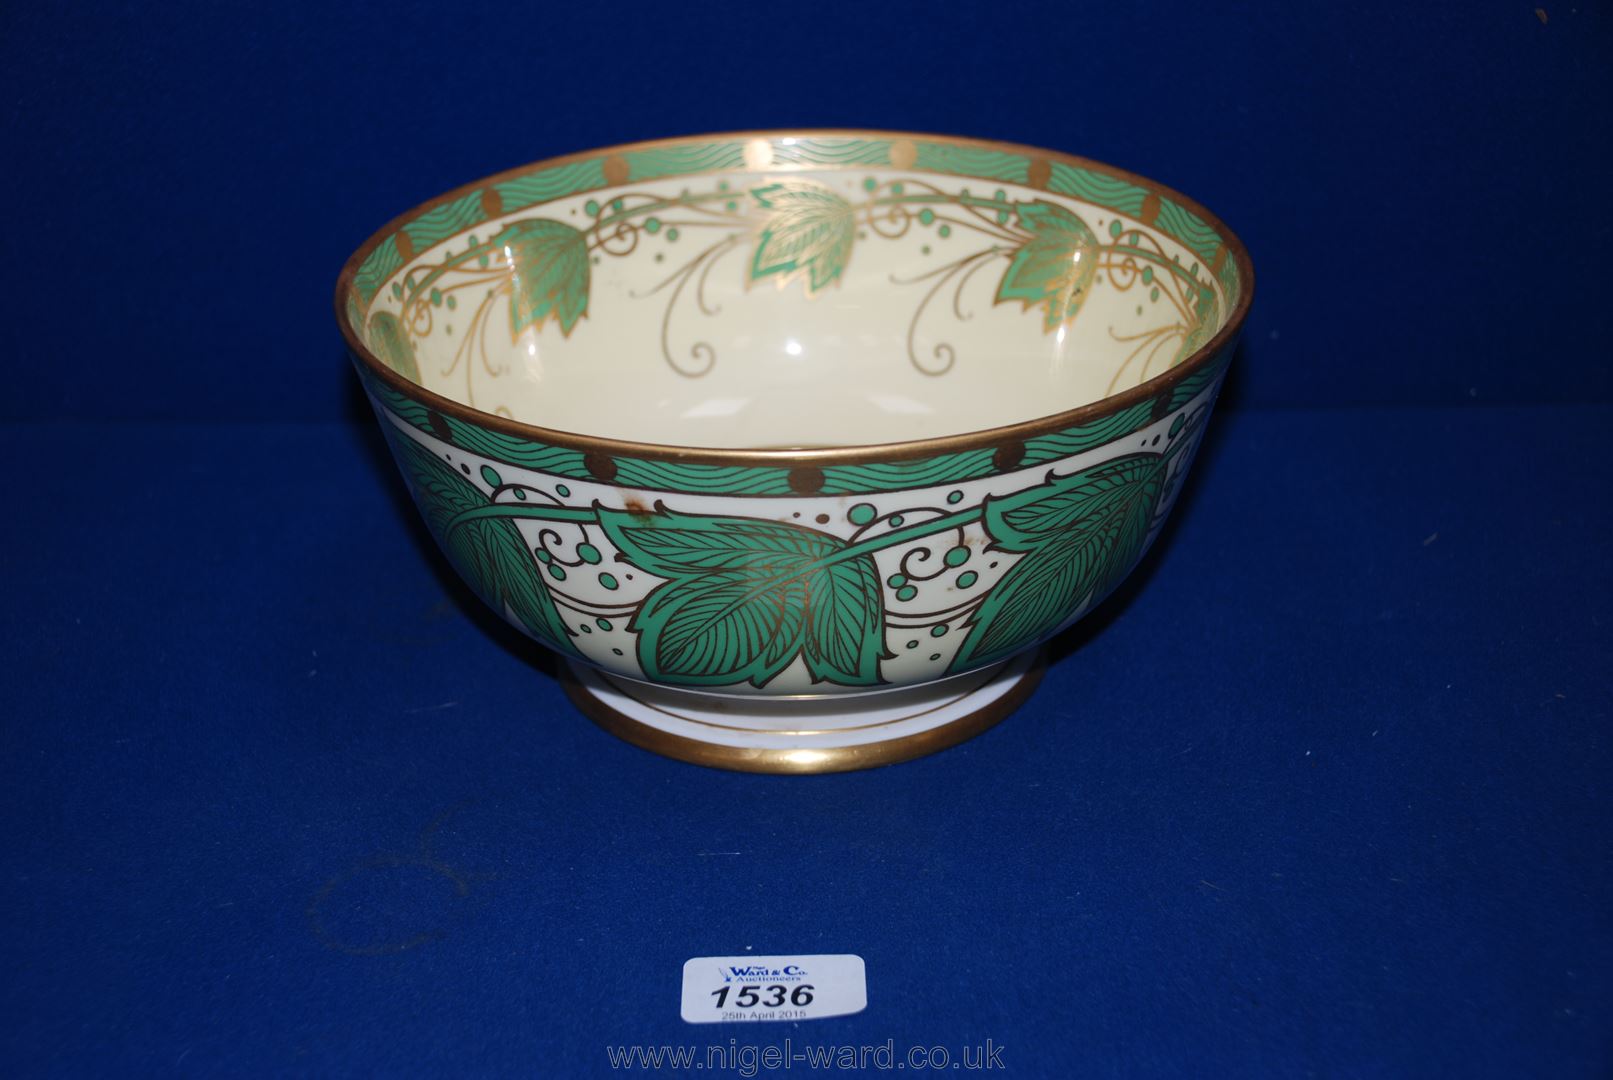 A Minton fruit Bowl in green and cream and gilt ivy leaf motif.